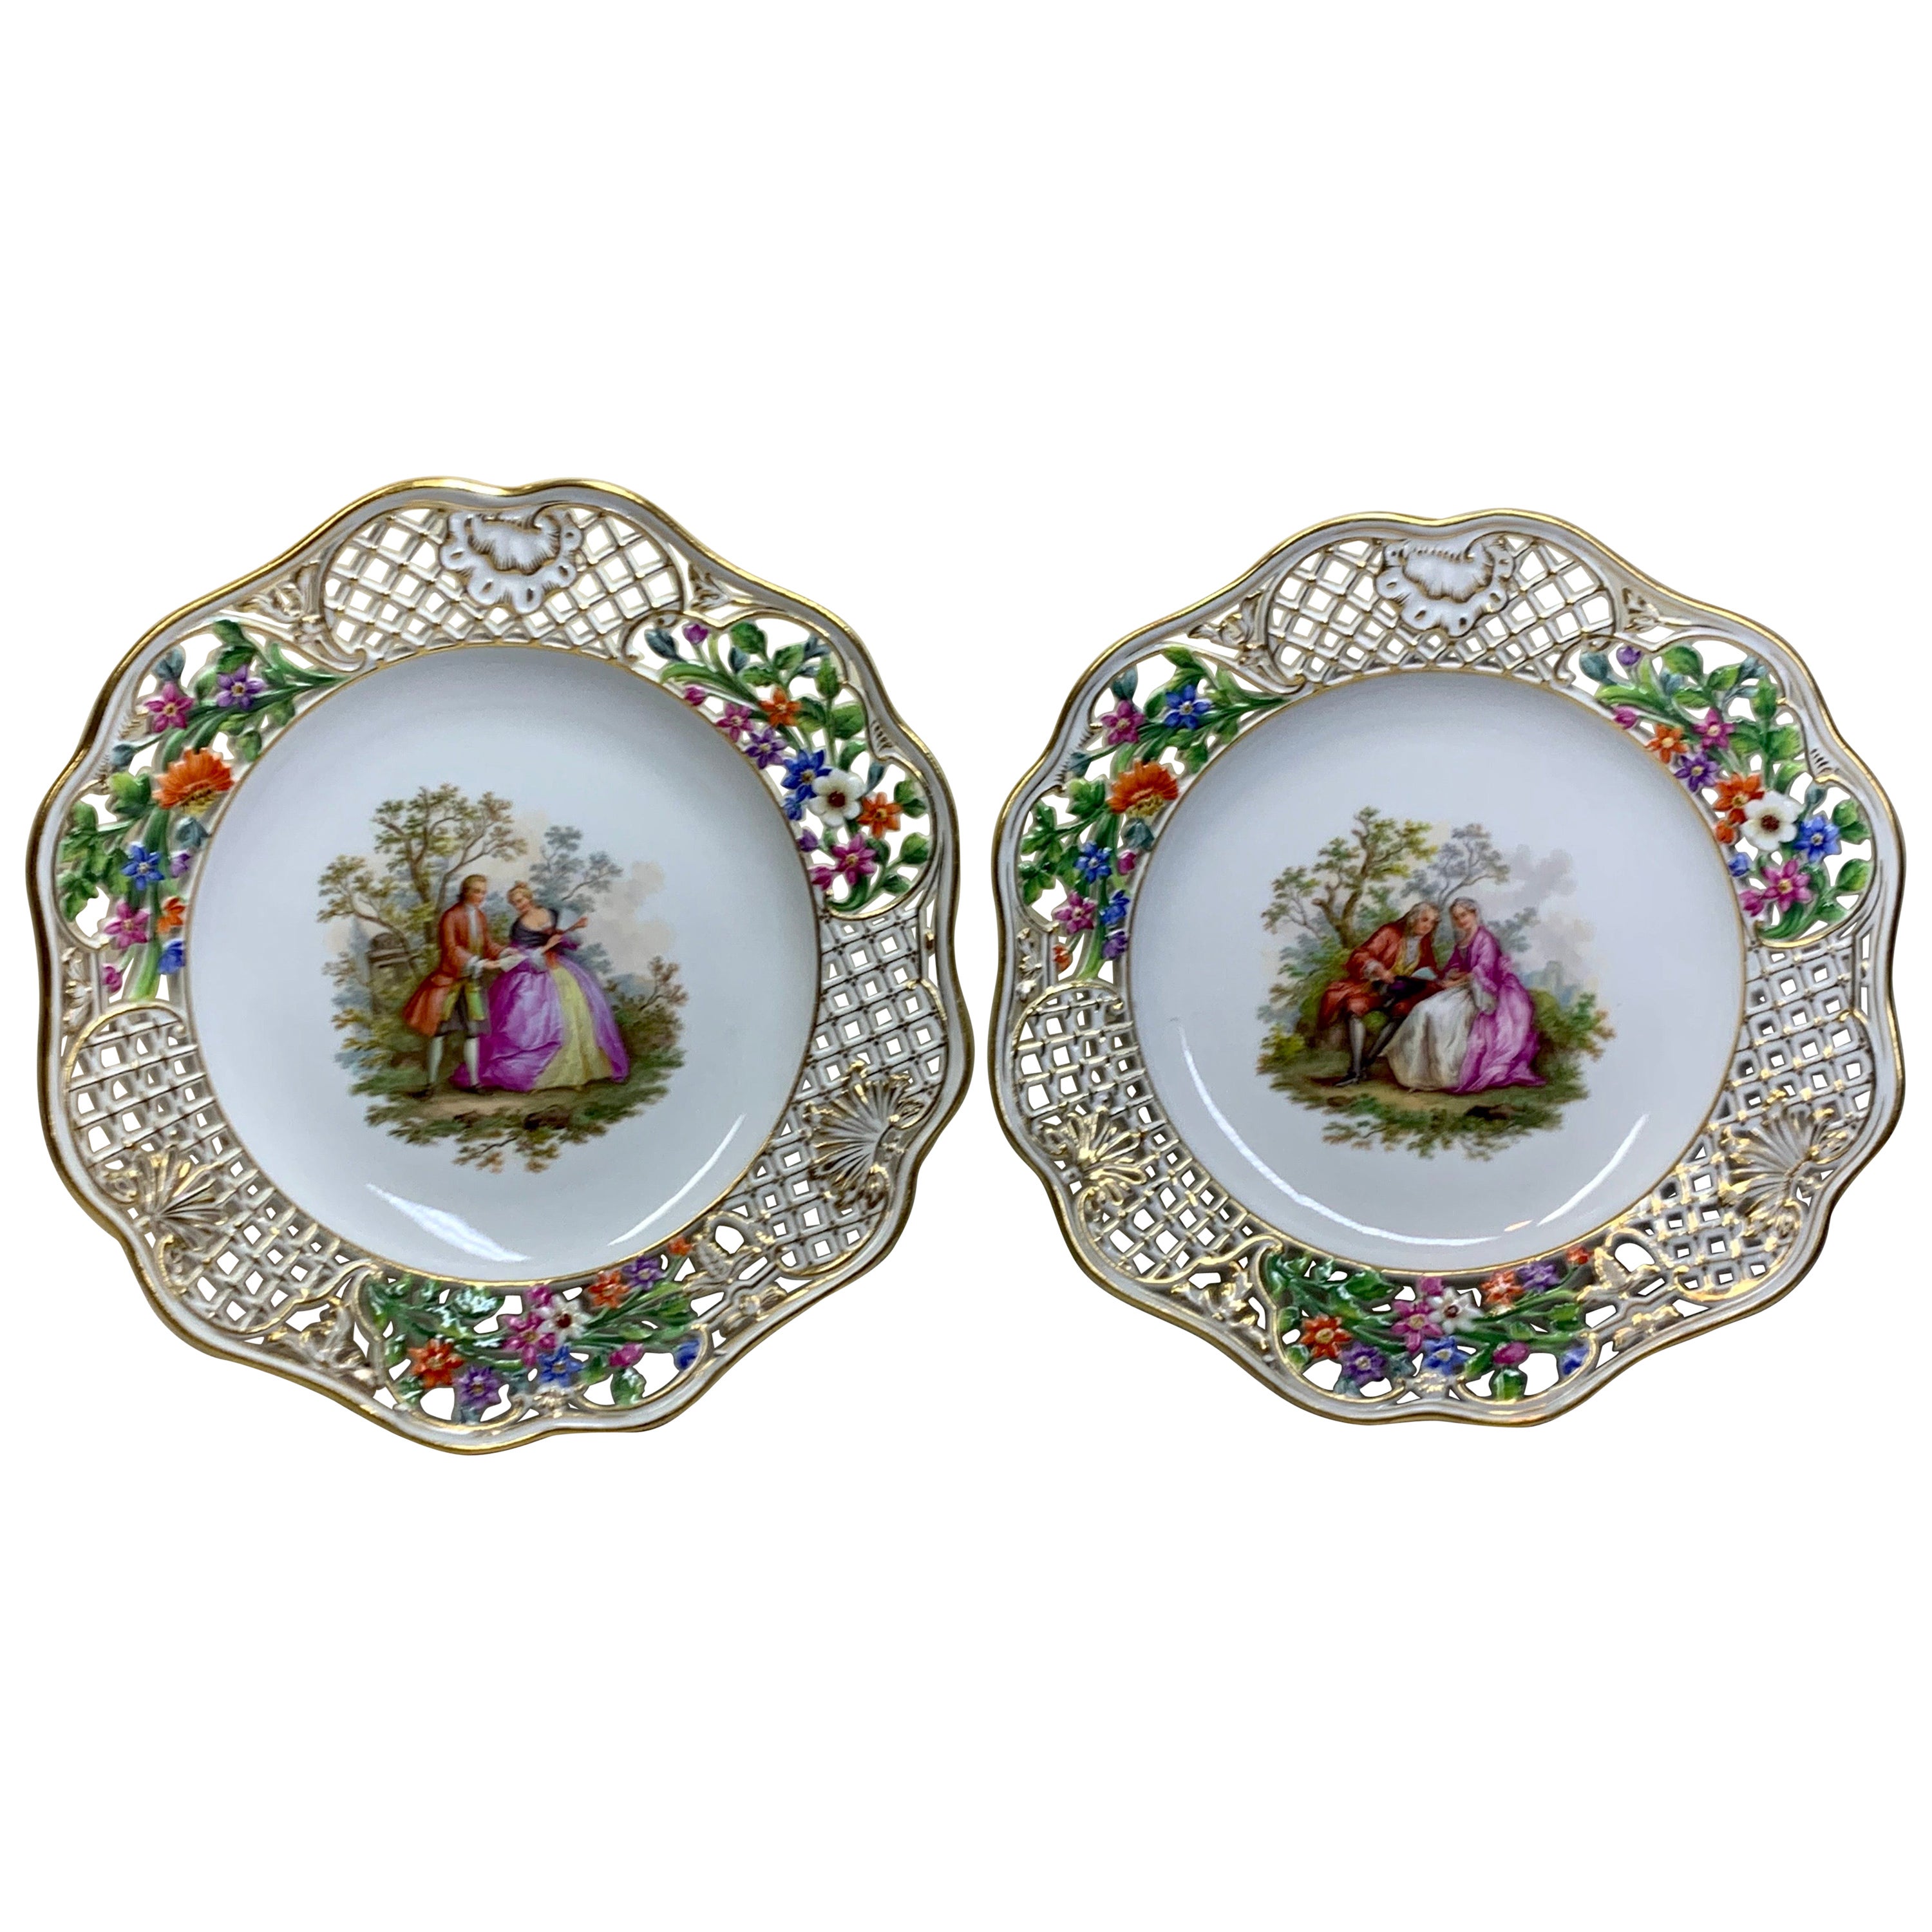 Pair of Meissen Reticulated Plates